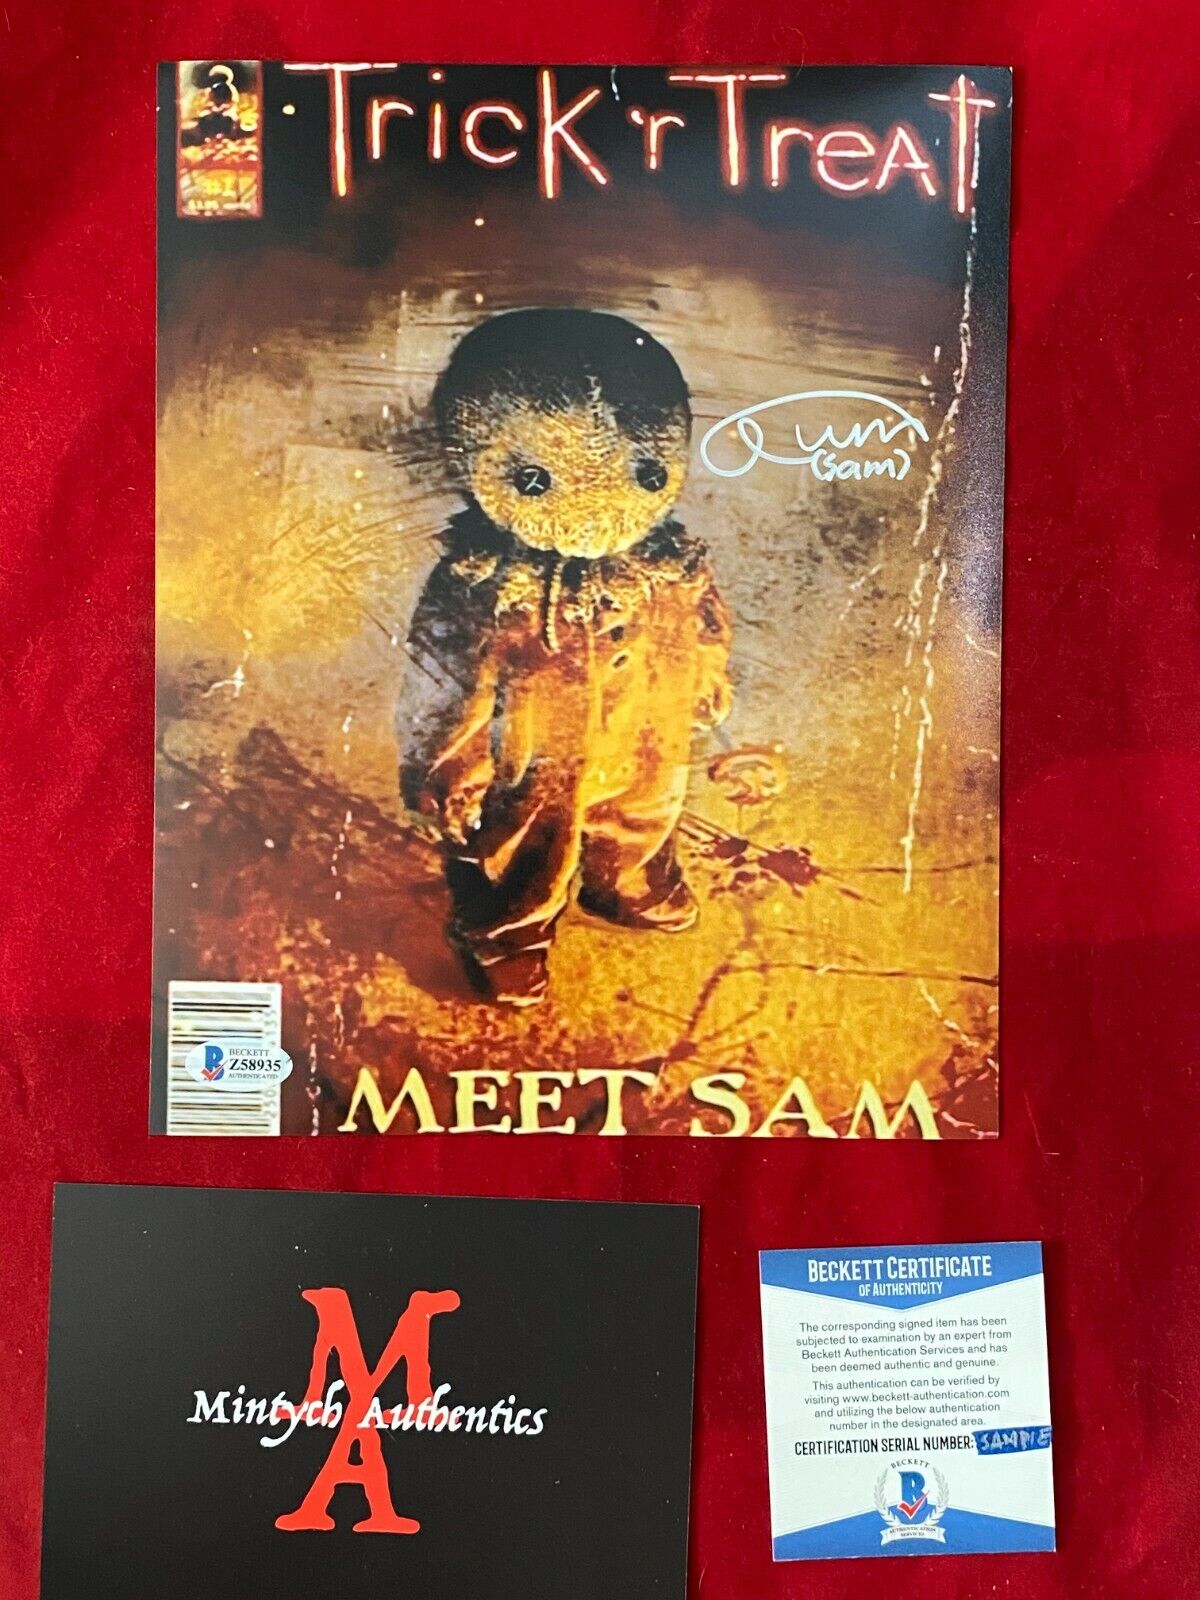 QUINN LORD TRICK 'R TREAT AUTOGRAPHED SIGNED 8x10 Photo Poster painting! BECKETT! HORROR! SAM!